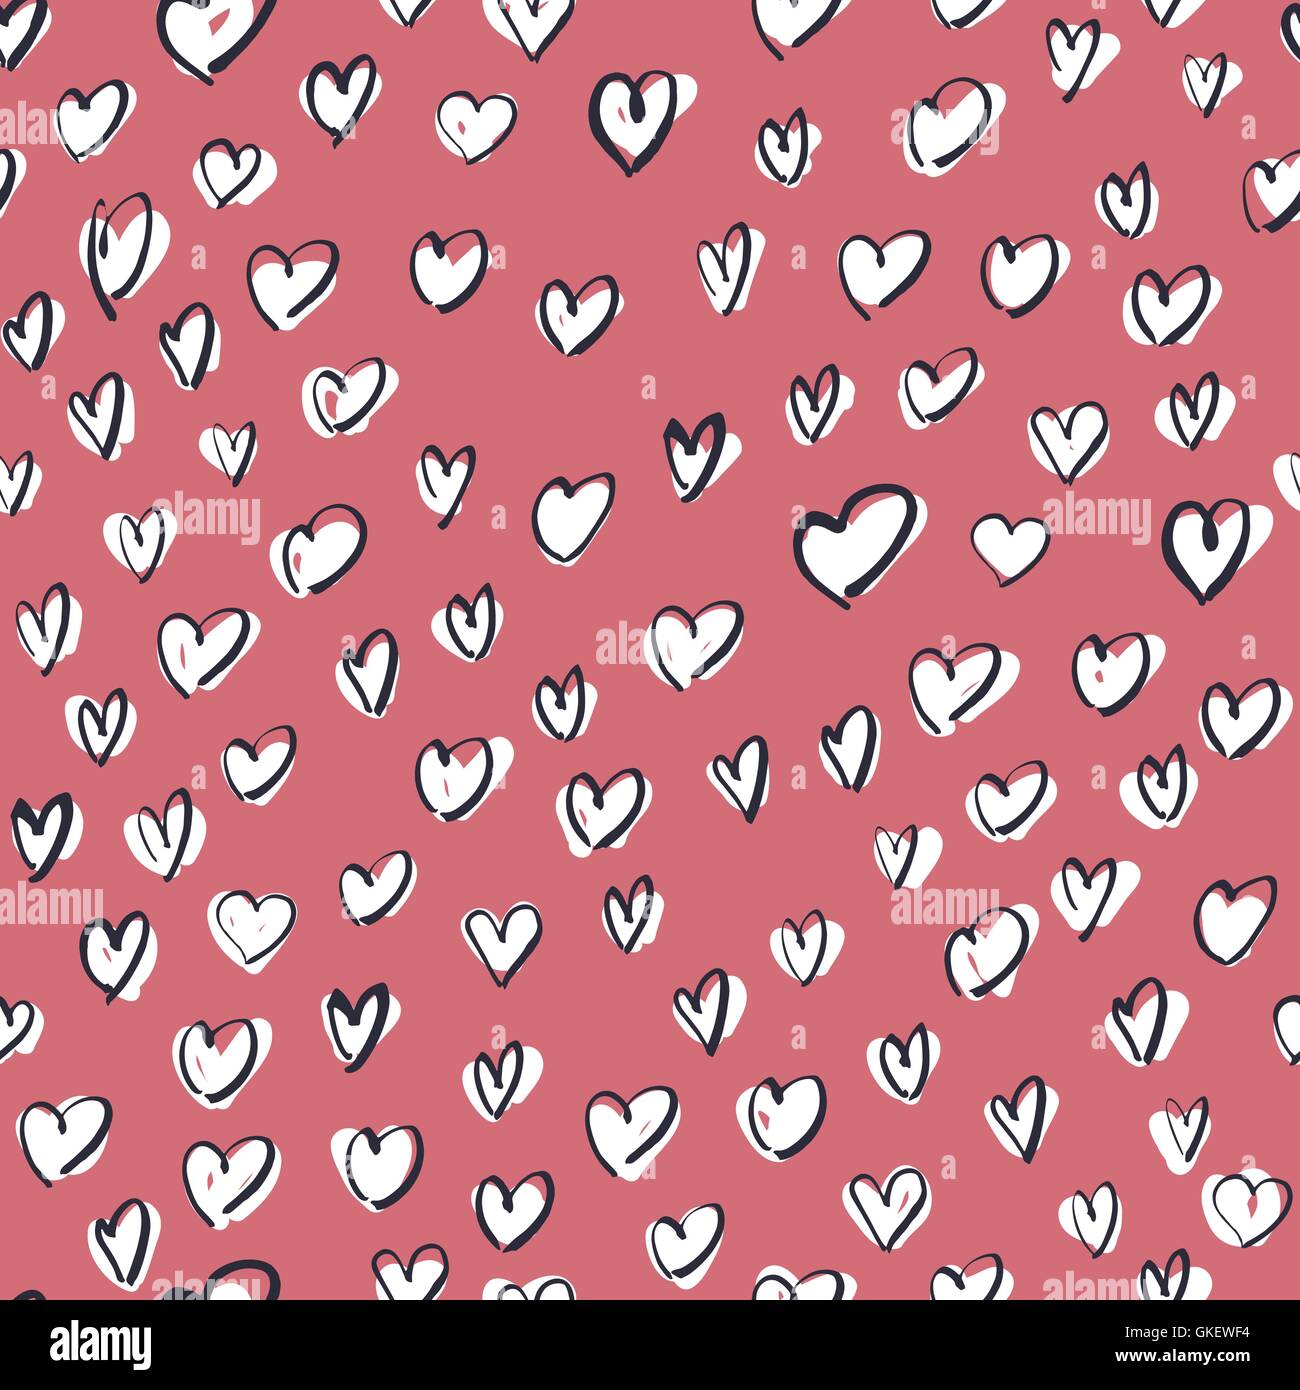 White Hearts on Pink Background. Seamless Hand Drawn Pattern Stock Vector